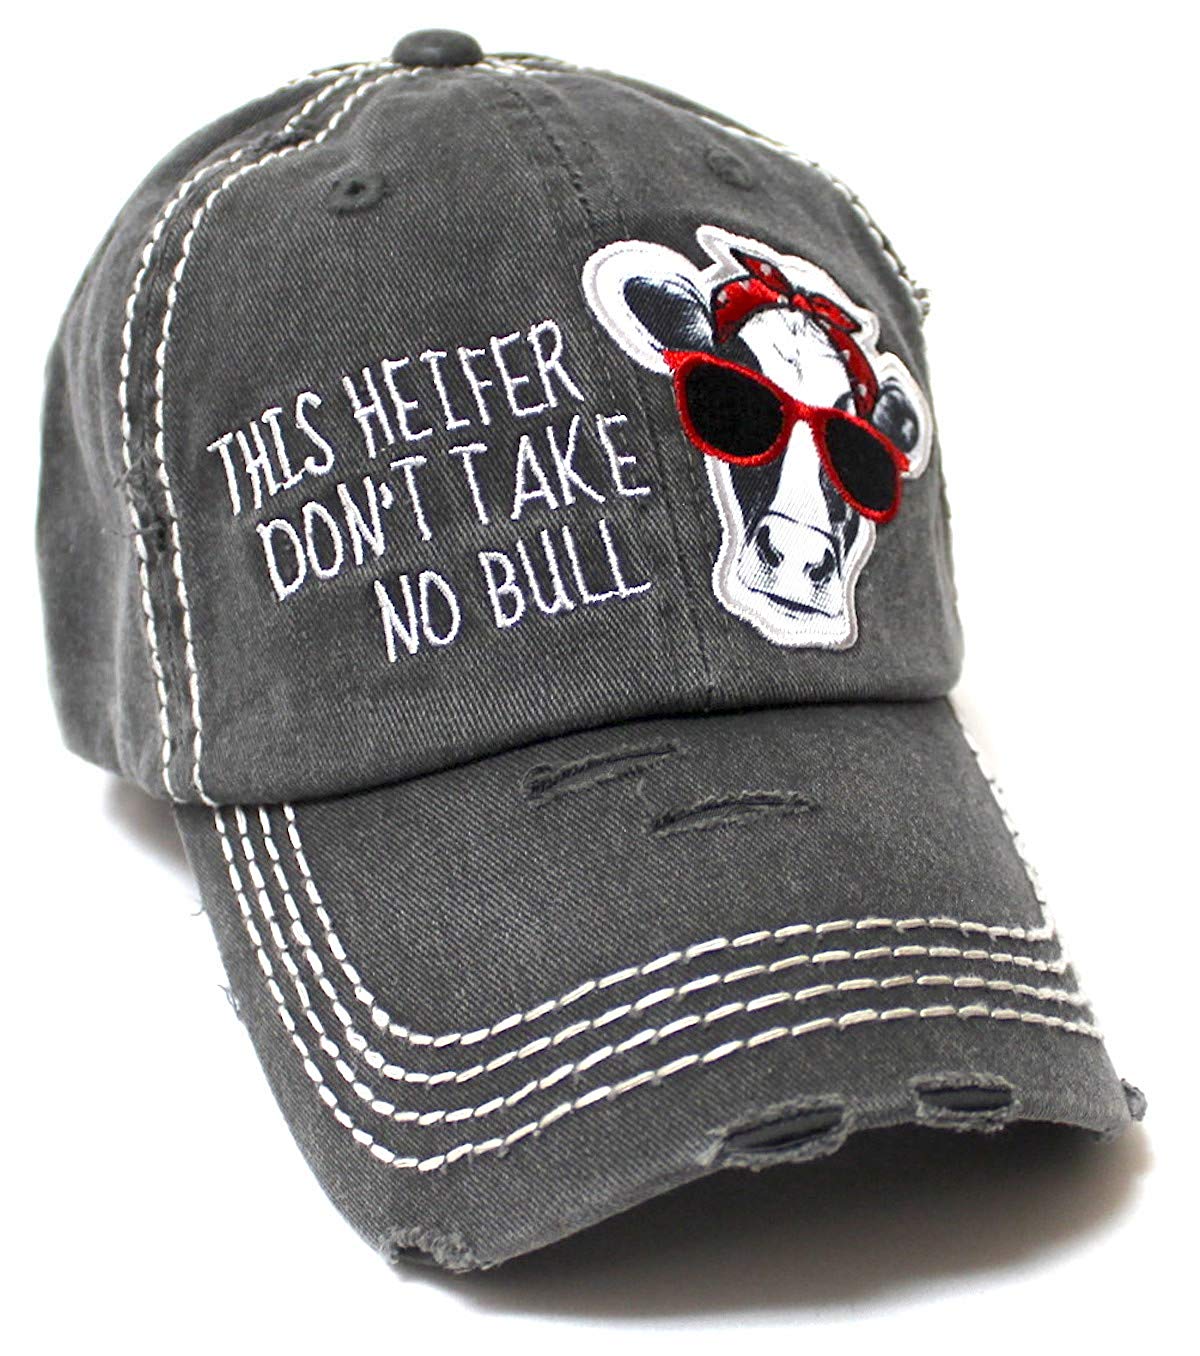 Country Humor Cap This Heifer Don't TAKE NO Bull Red Western Bandana Cow Patch Baseball Hat, Blk - Caps 'N Vintage 